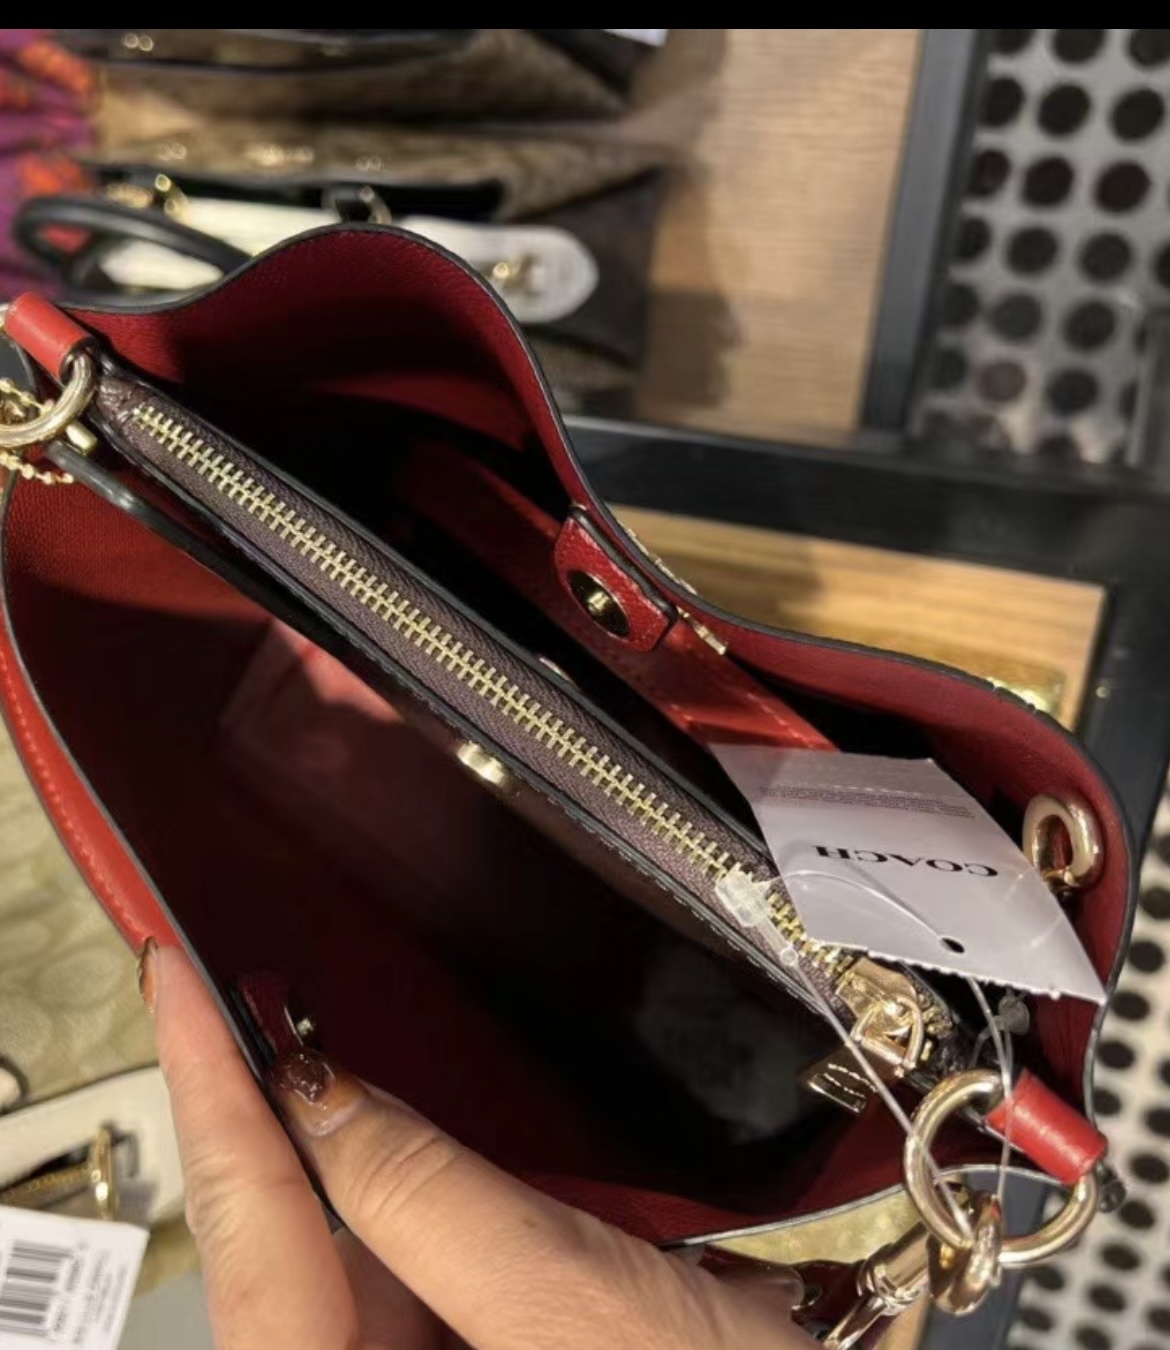 Coach Charlie Bucket Bag Review & Comparison to LV Neo Noe 